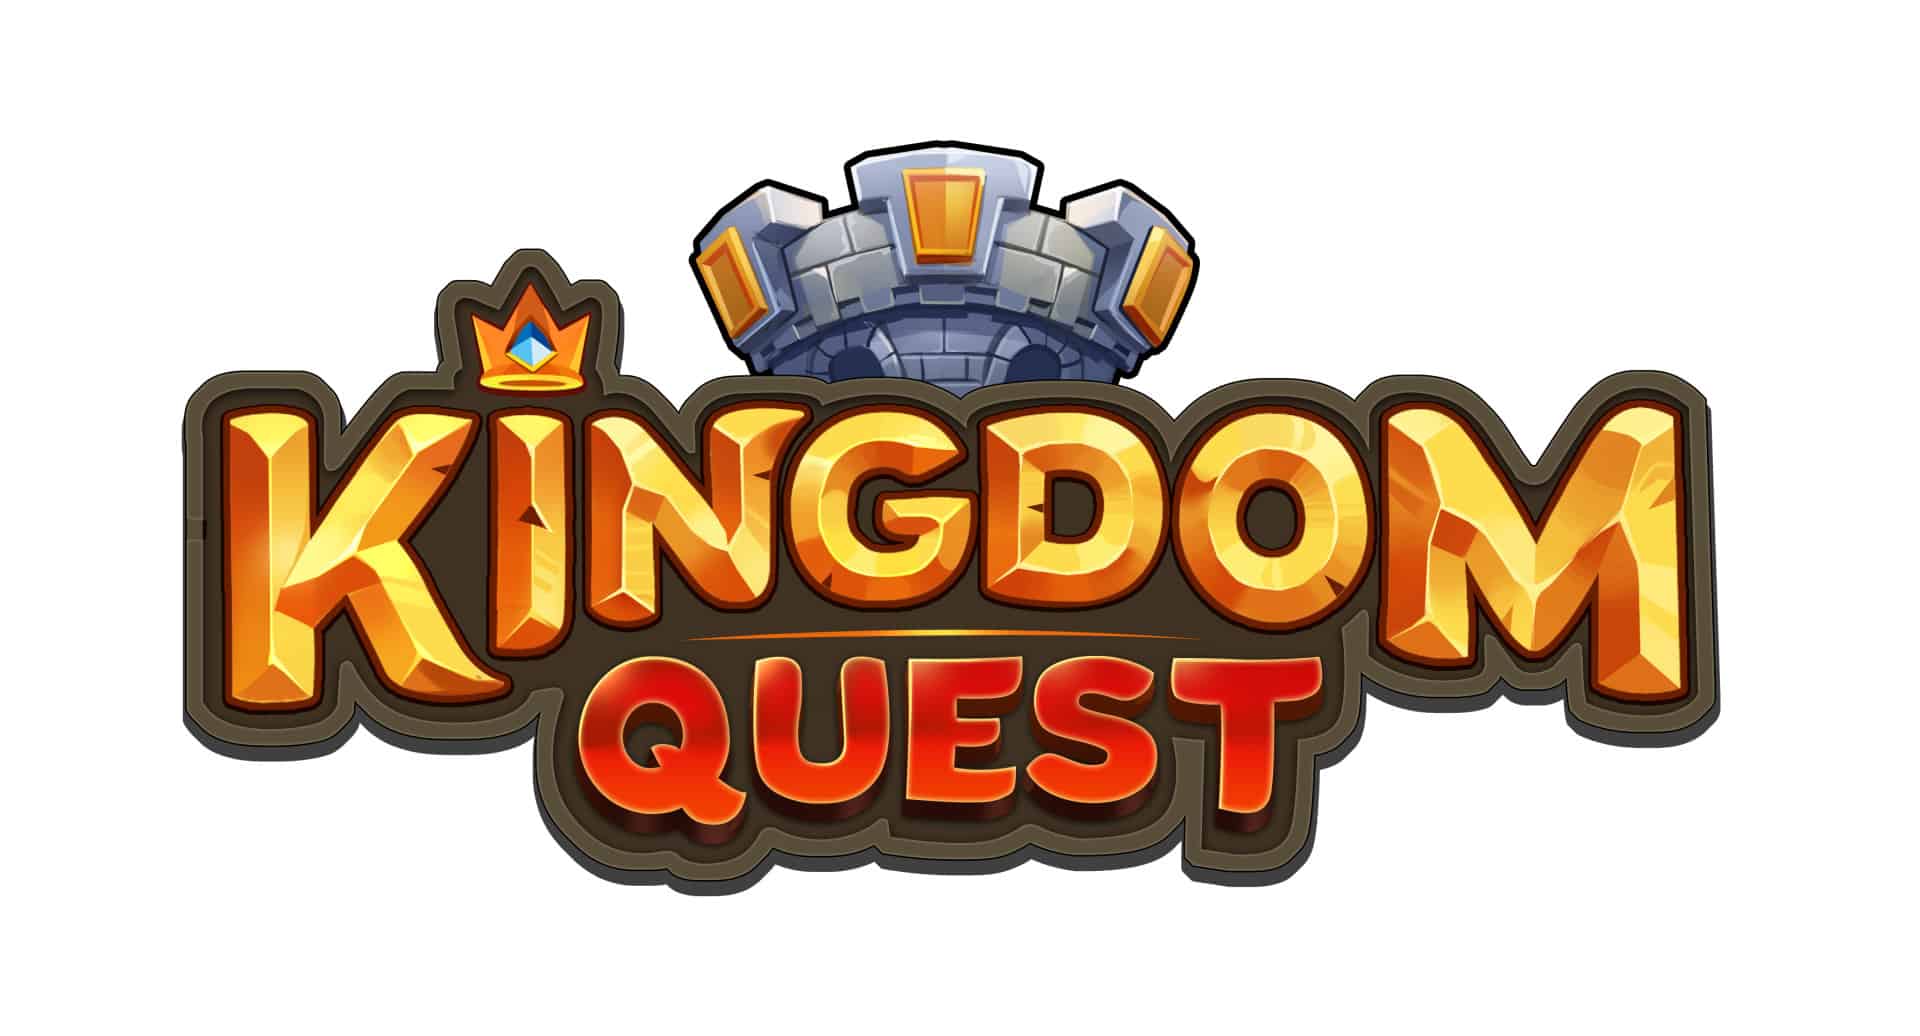 Kingdom-quest-launches-token-ido-on-poolz